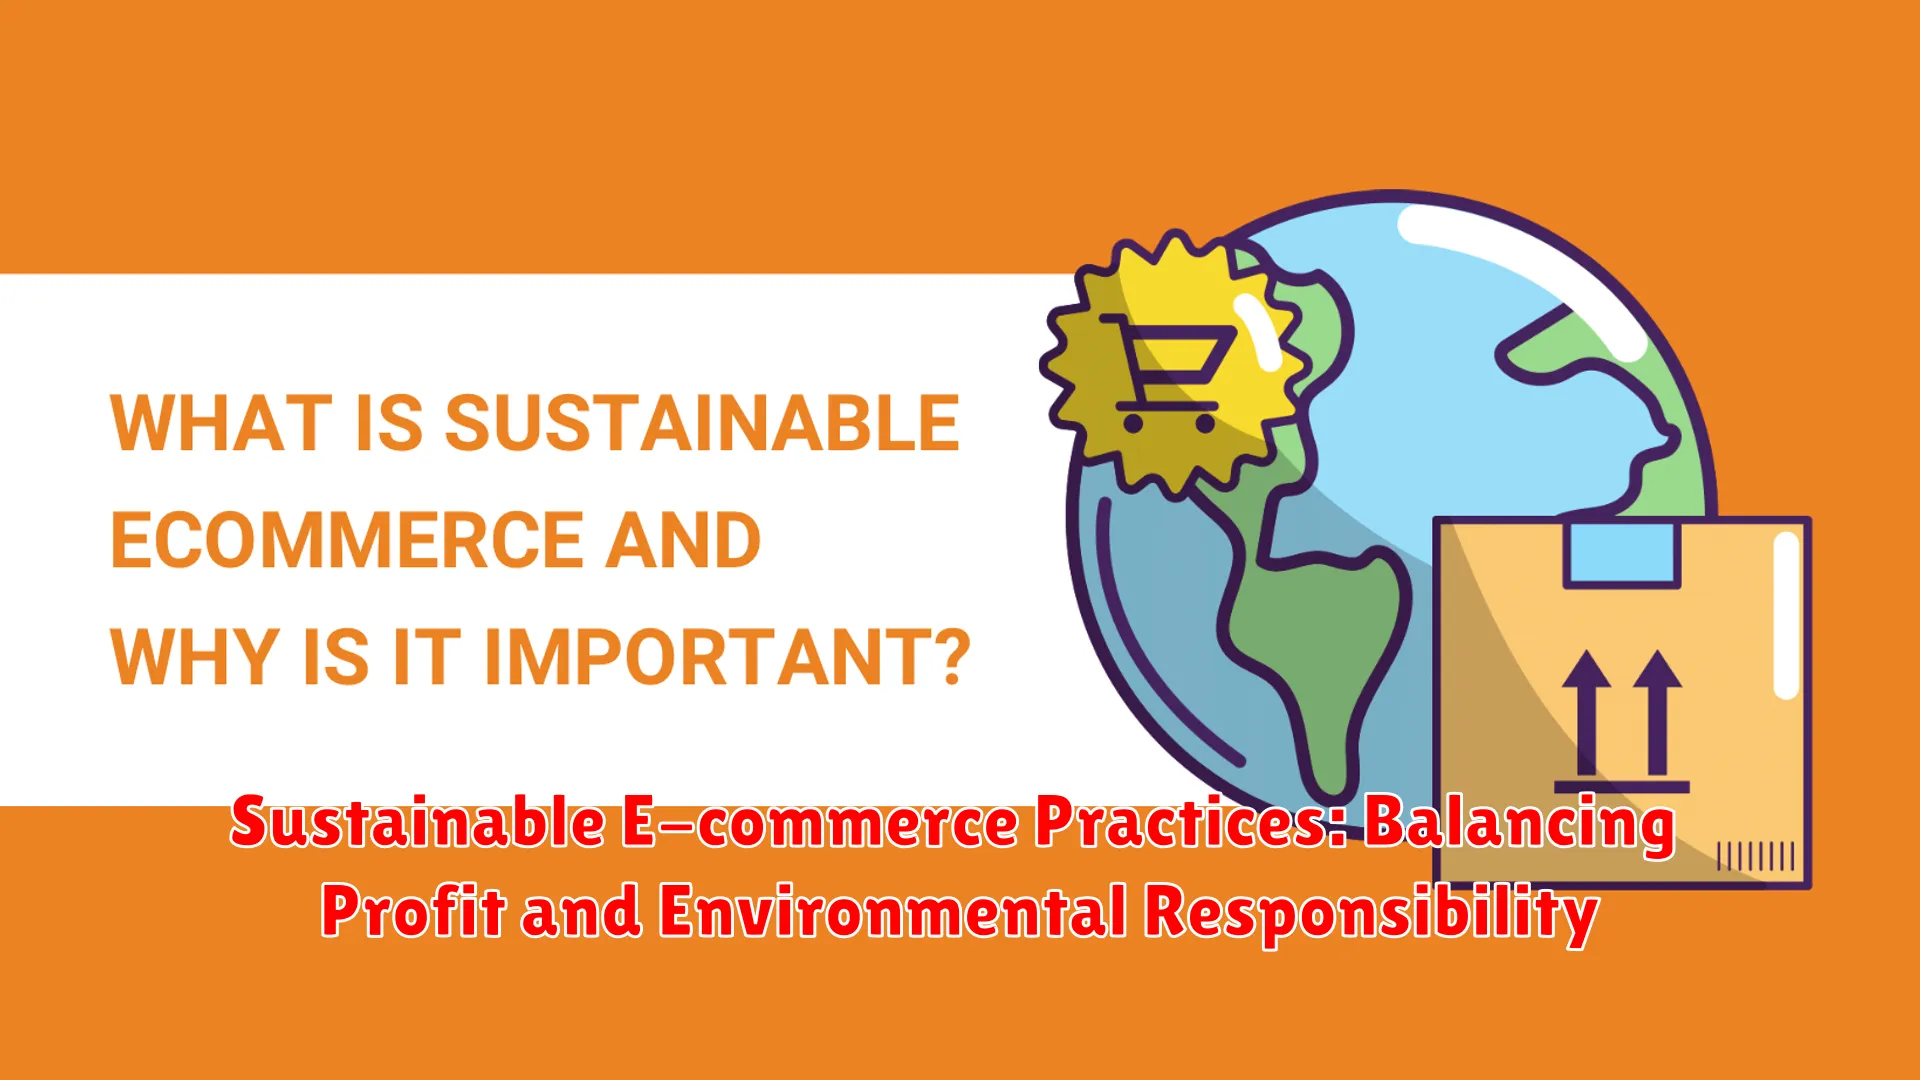 Sustainable E-commerce Practices: Balancing Profit and Environmental Responsibility